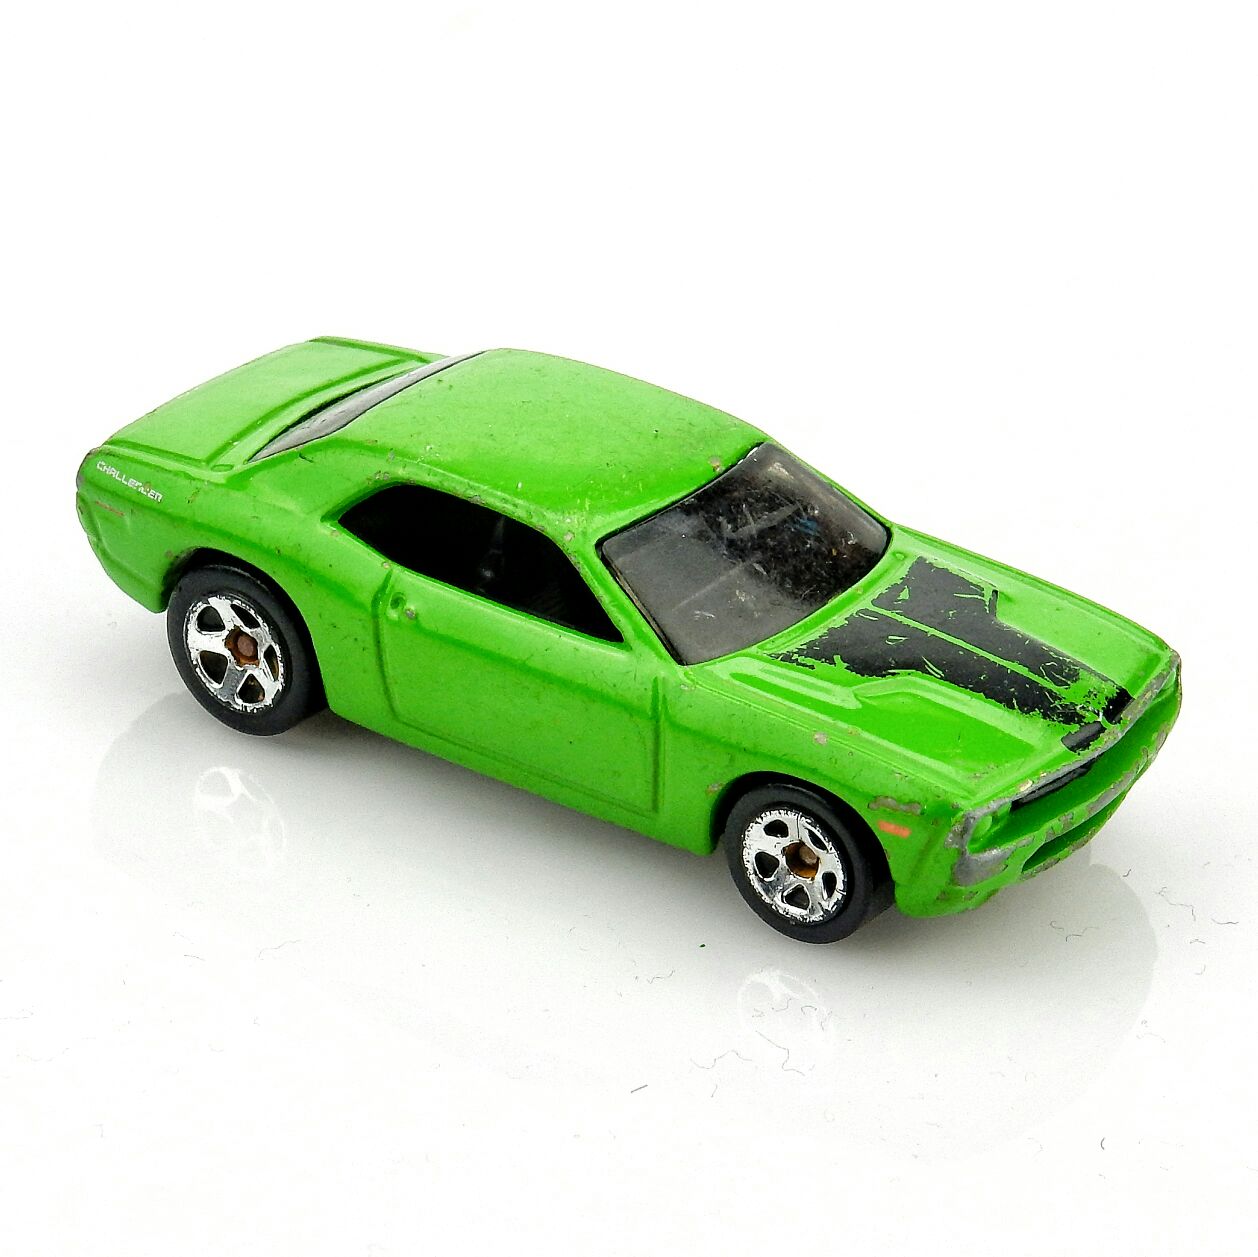 Dodge Challenger Concept (HW) - New Models 2007 toy car collectible - Main Image 1